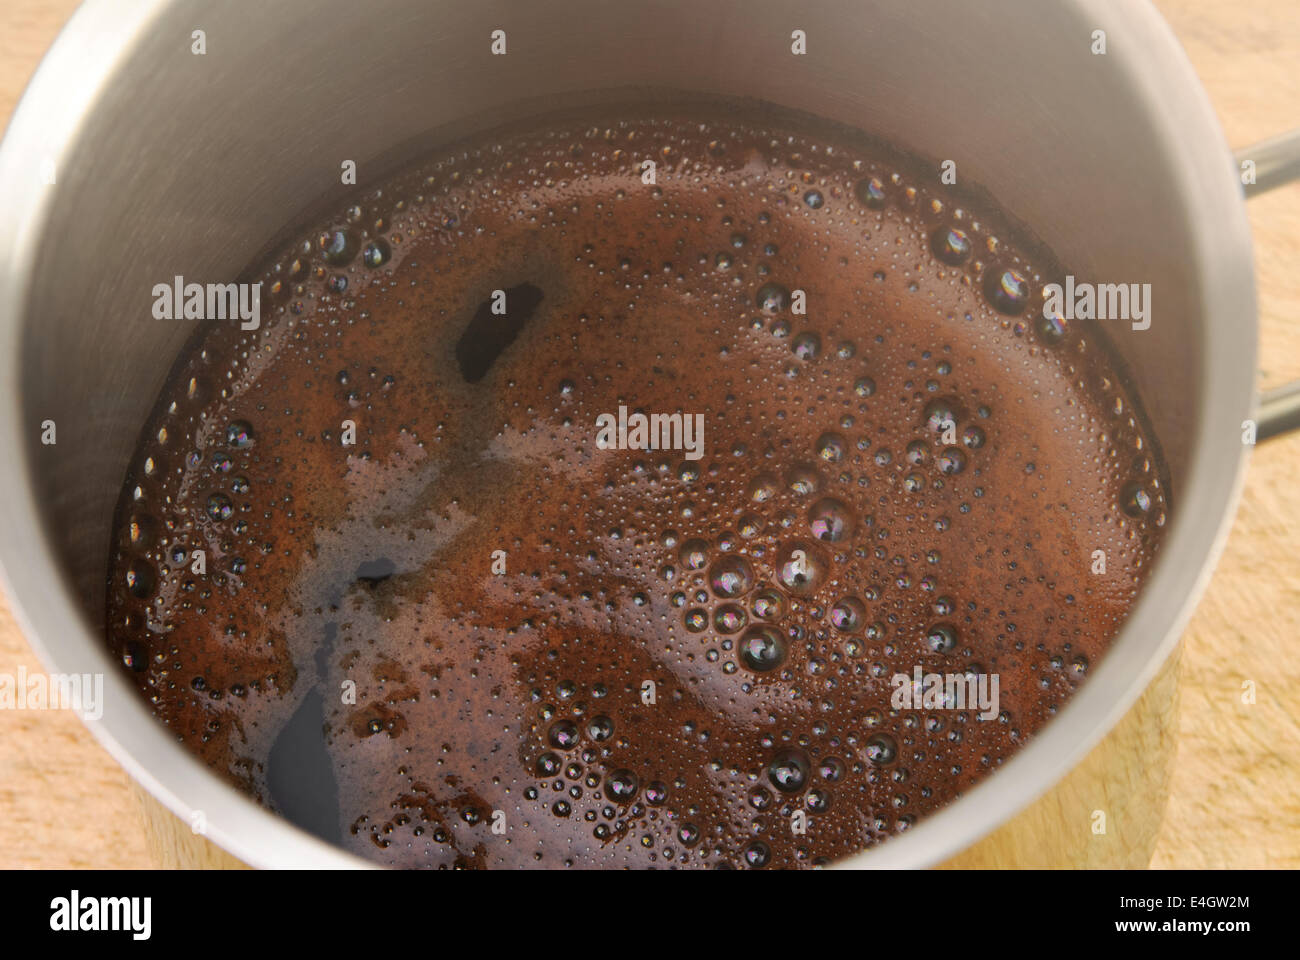 Hot freshly made coffee in a coffee pot Stock Photo